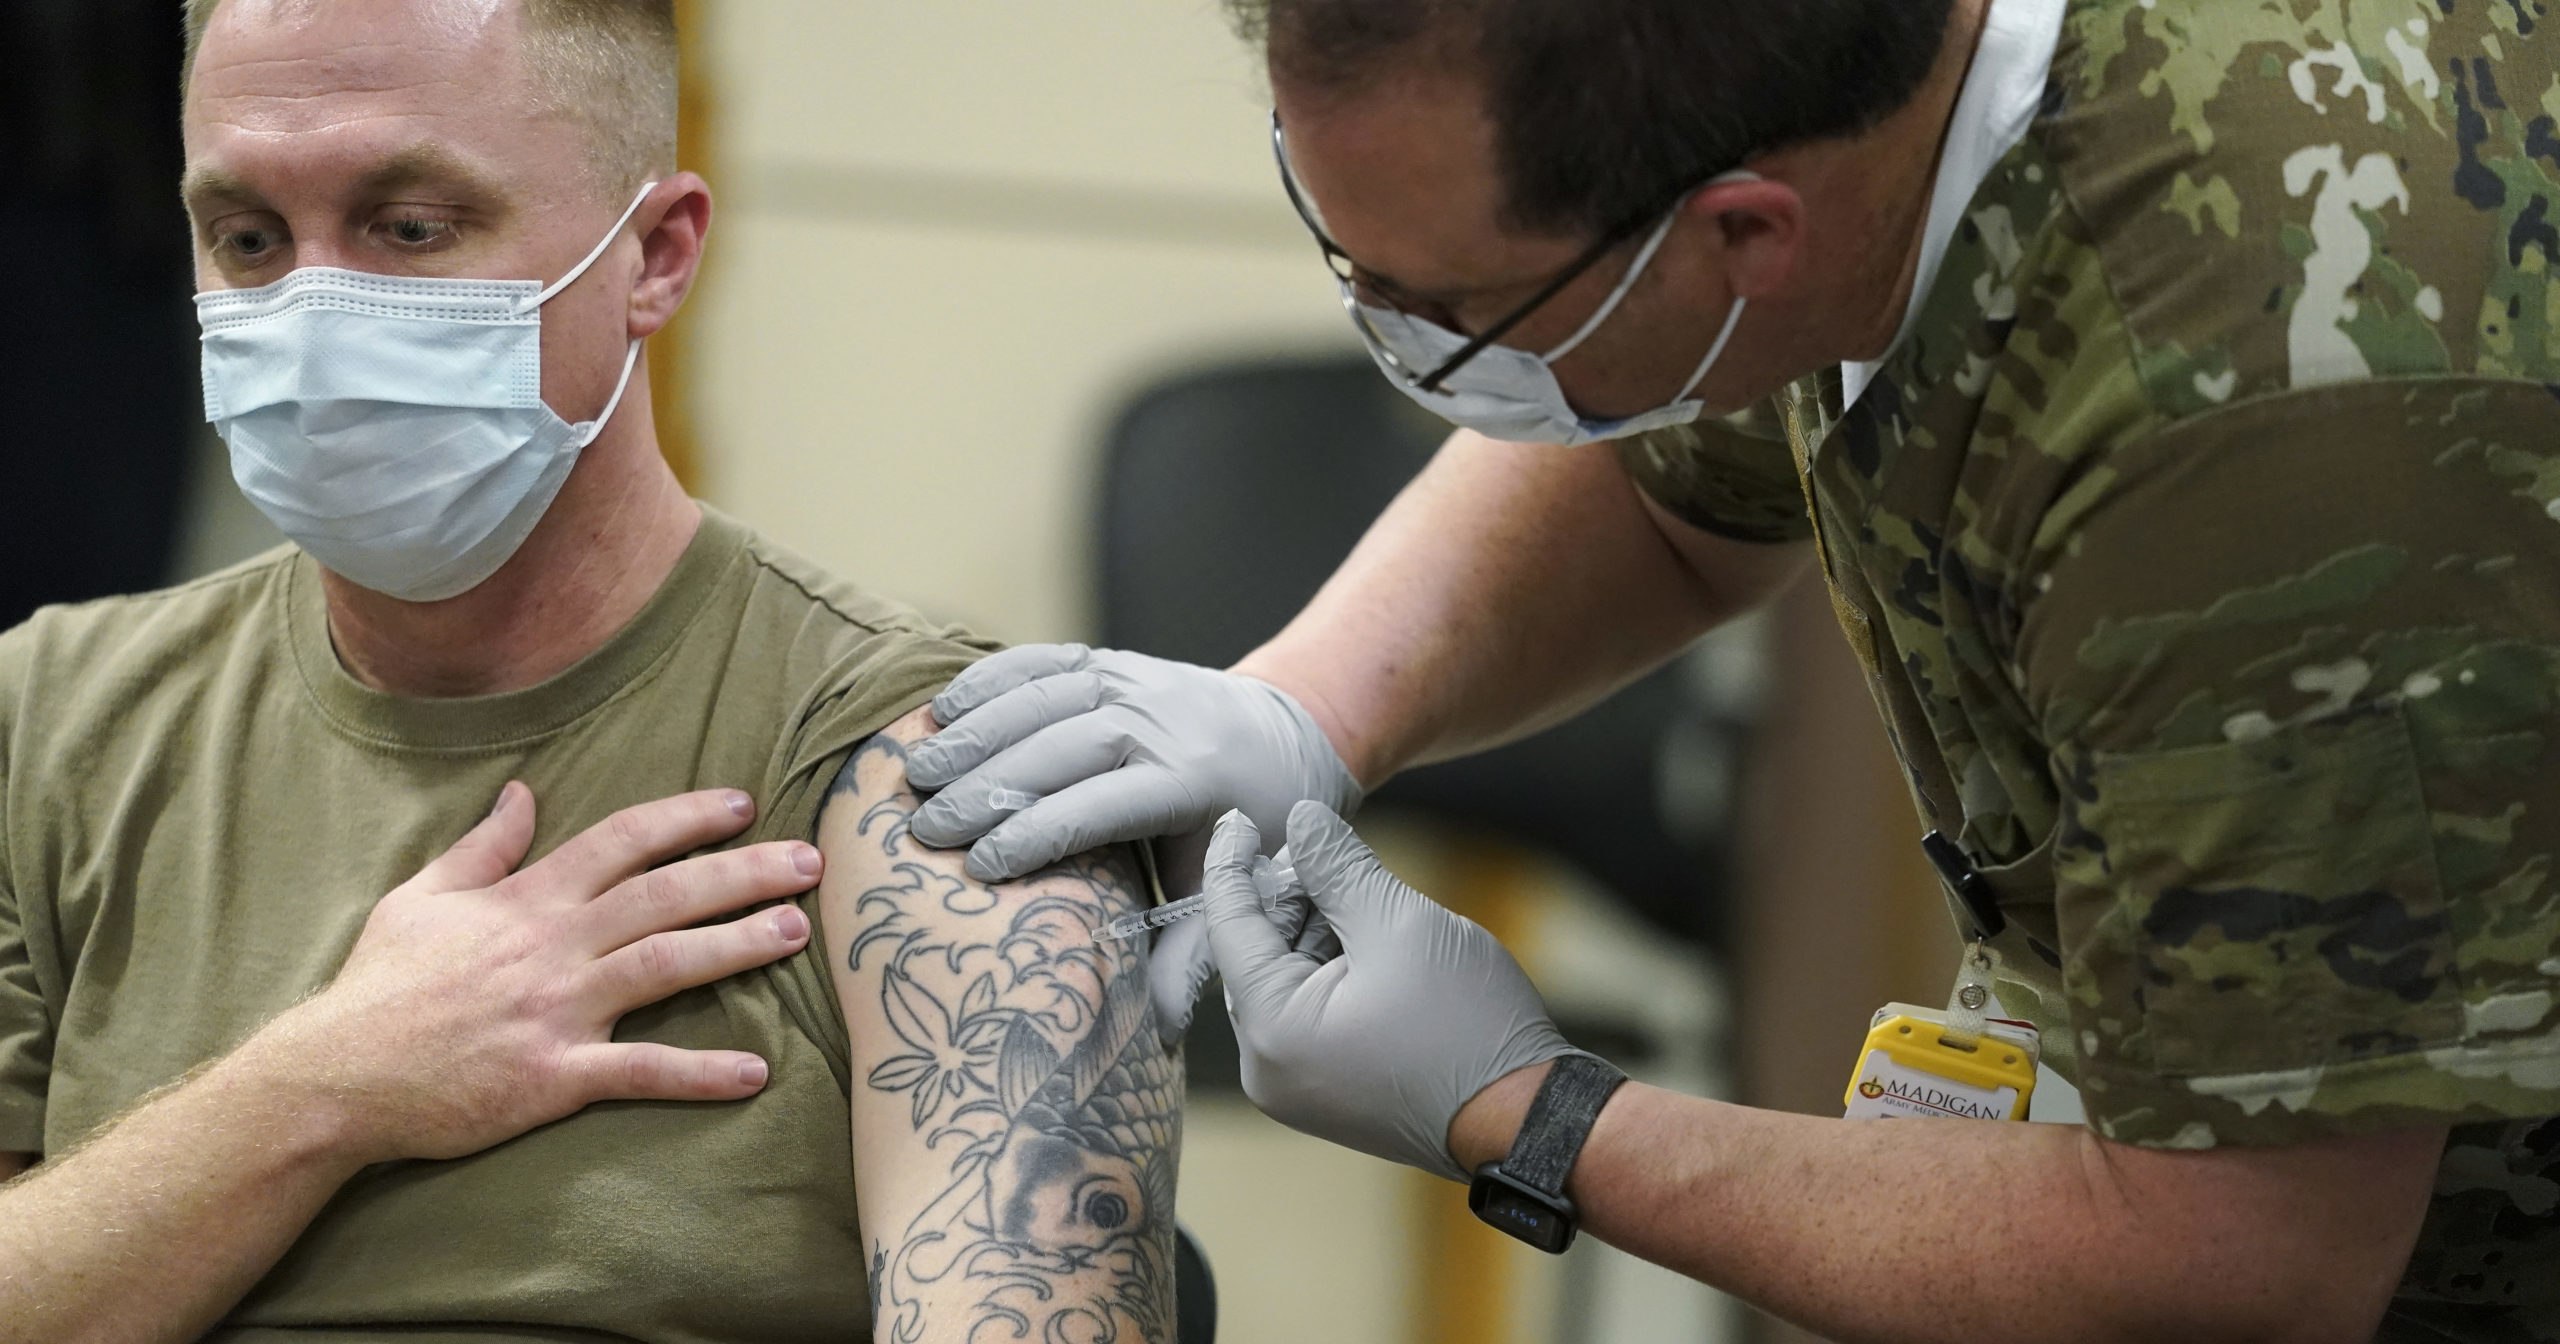 Staff Sgt. Travis Snyder receives his first dose of the Pfizer COVID-19 vaccine at Madigan Army Medical Center at Joint Base Lewis-McChord, south of Seattle, on Dec. 16, 2020.